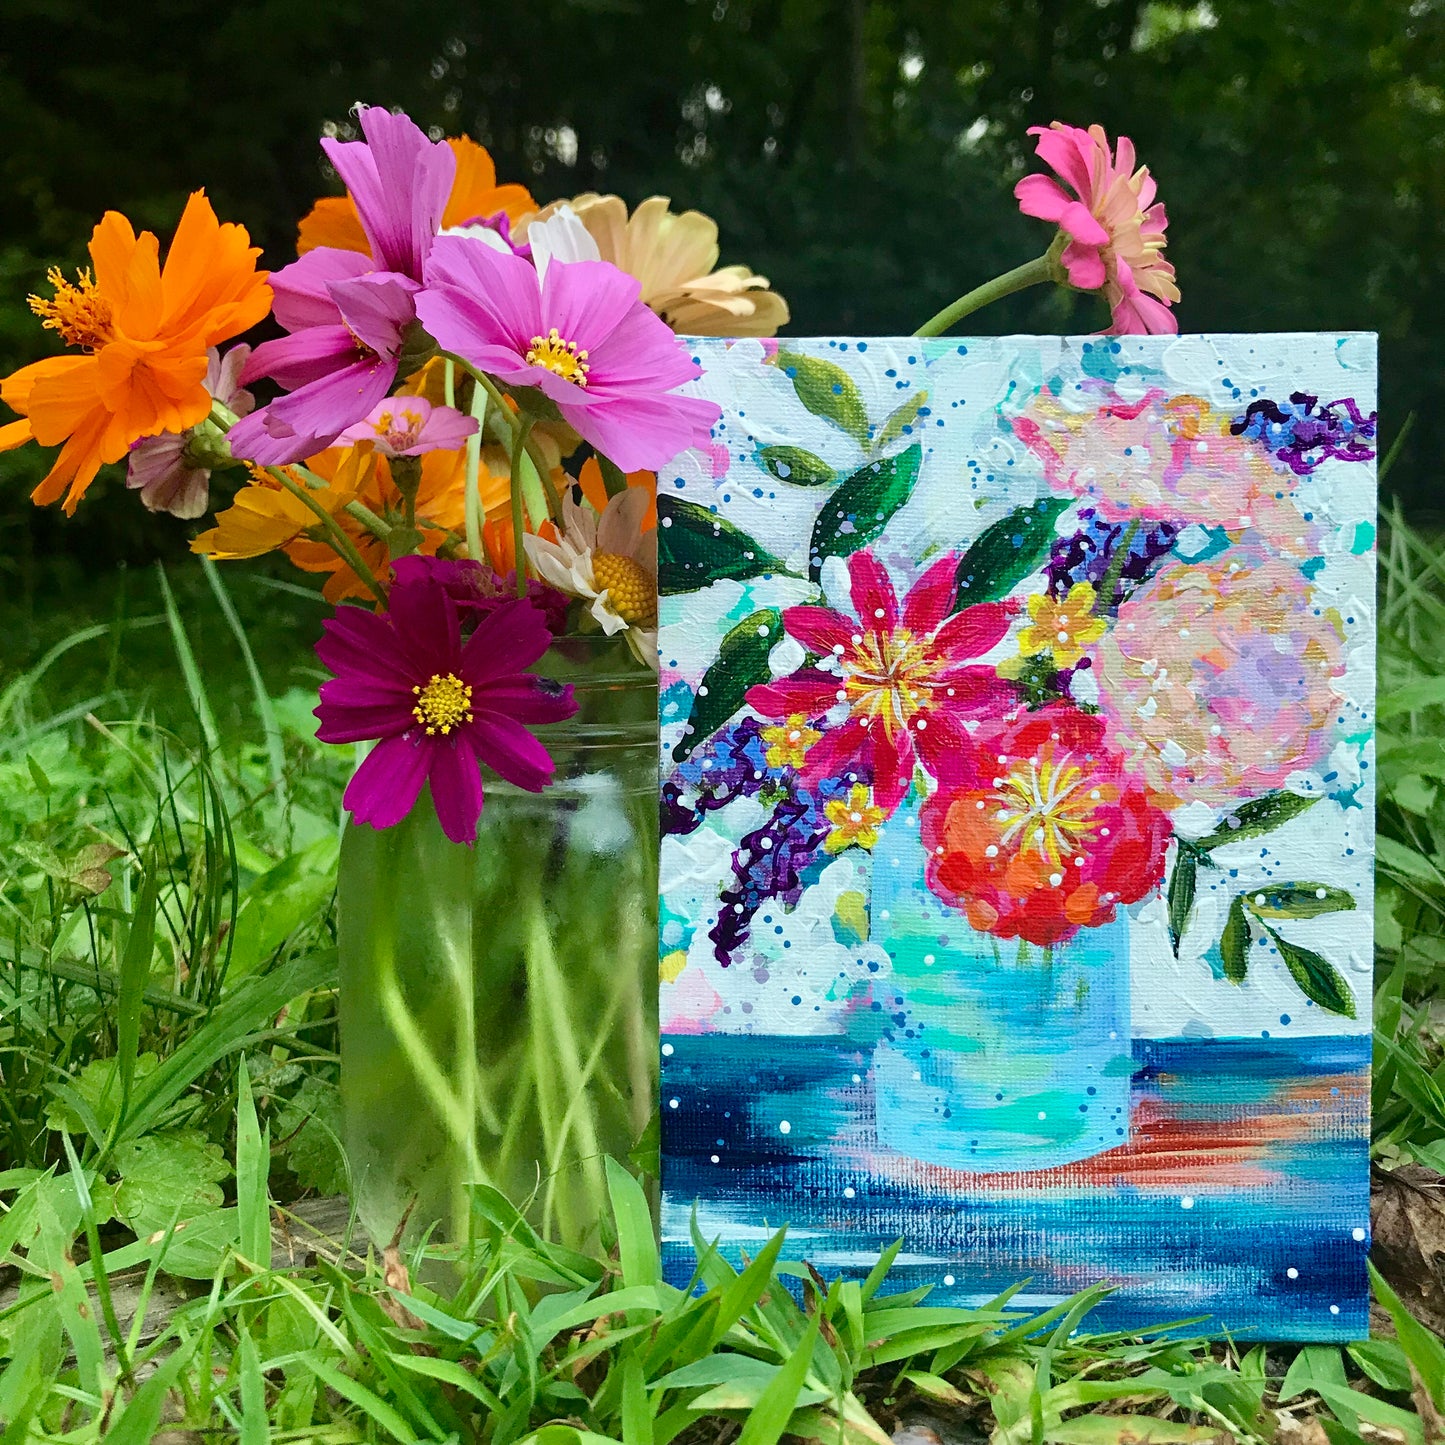 August Daily Painting Day 17 “Golden Seaside Bouquet" 5x7 inch Floral Original - Bethany Joy Art